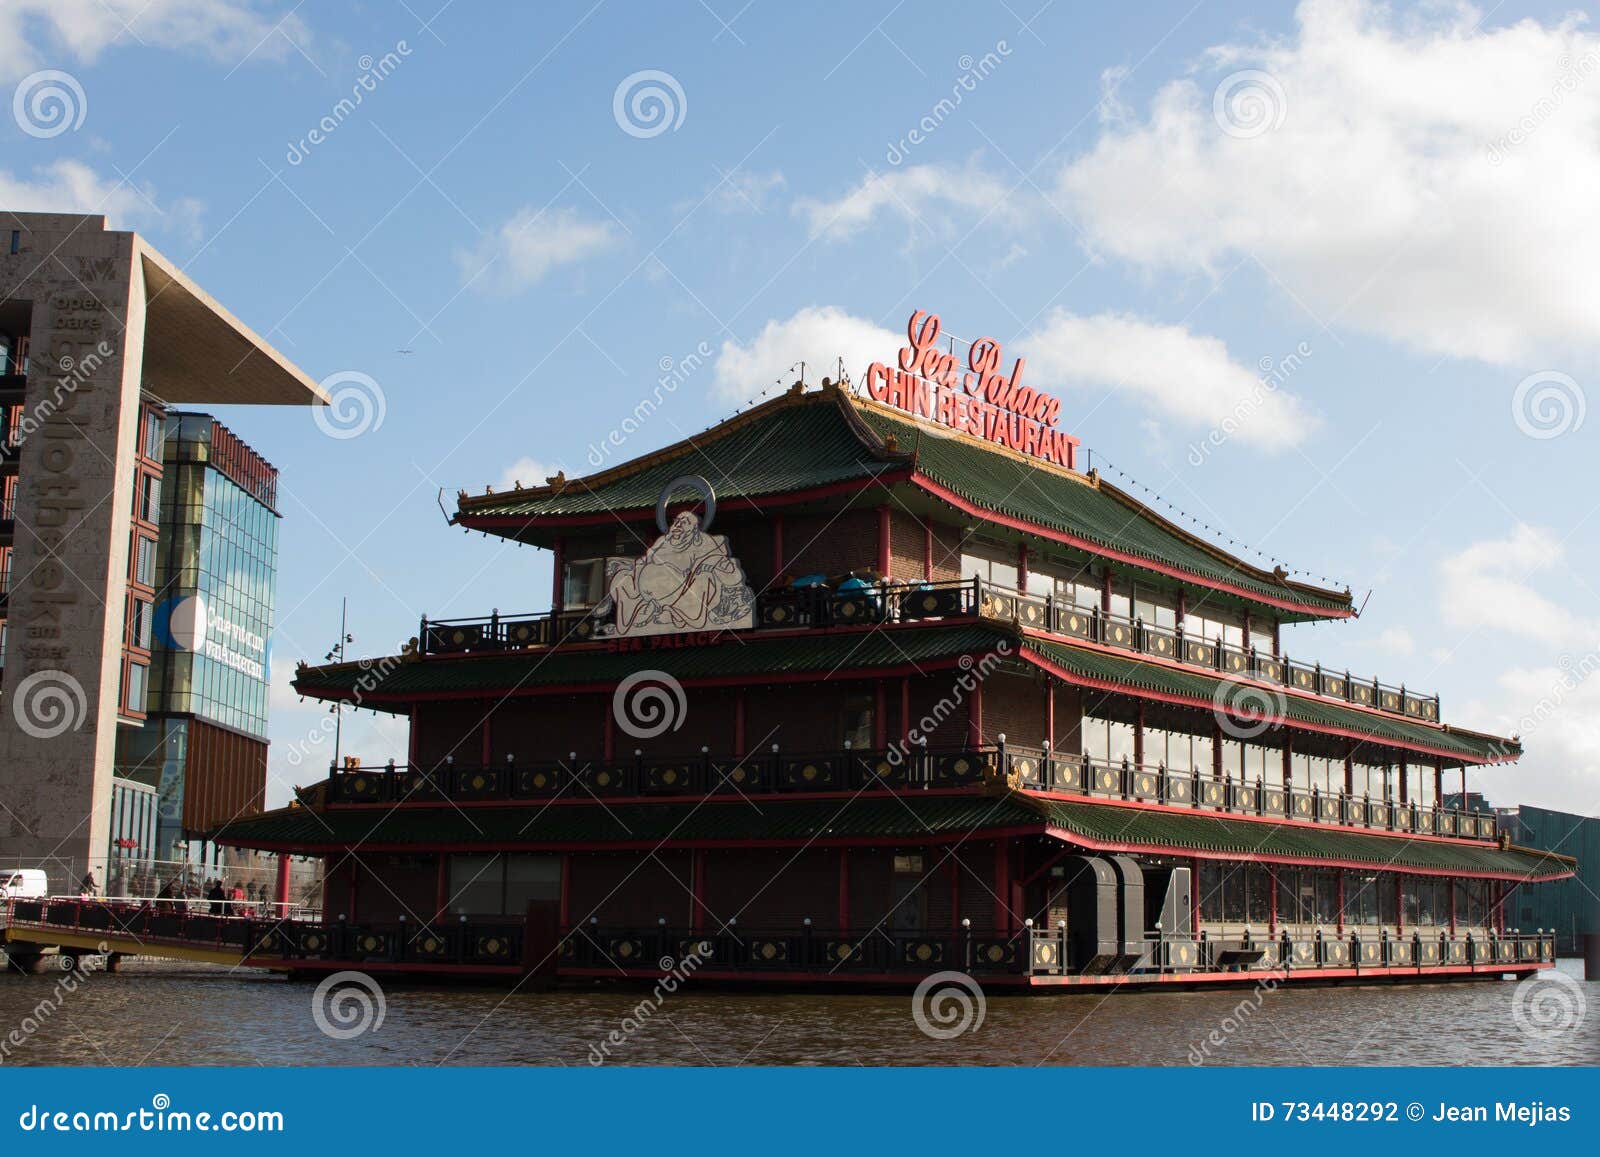 Welp Floating Restaurant In Amsterdam Editorial Photography - Image of ER-36